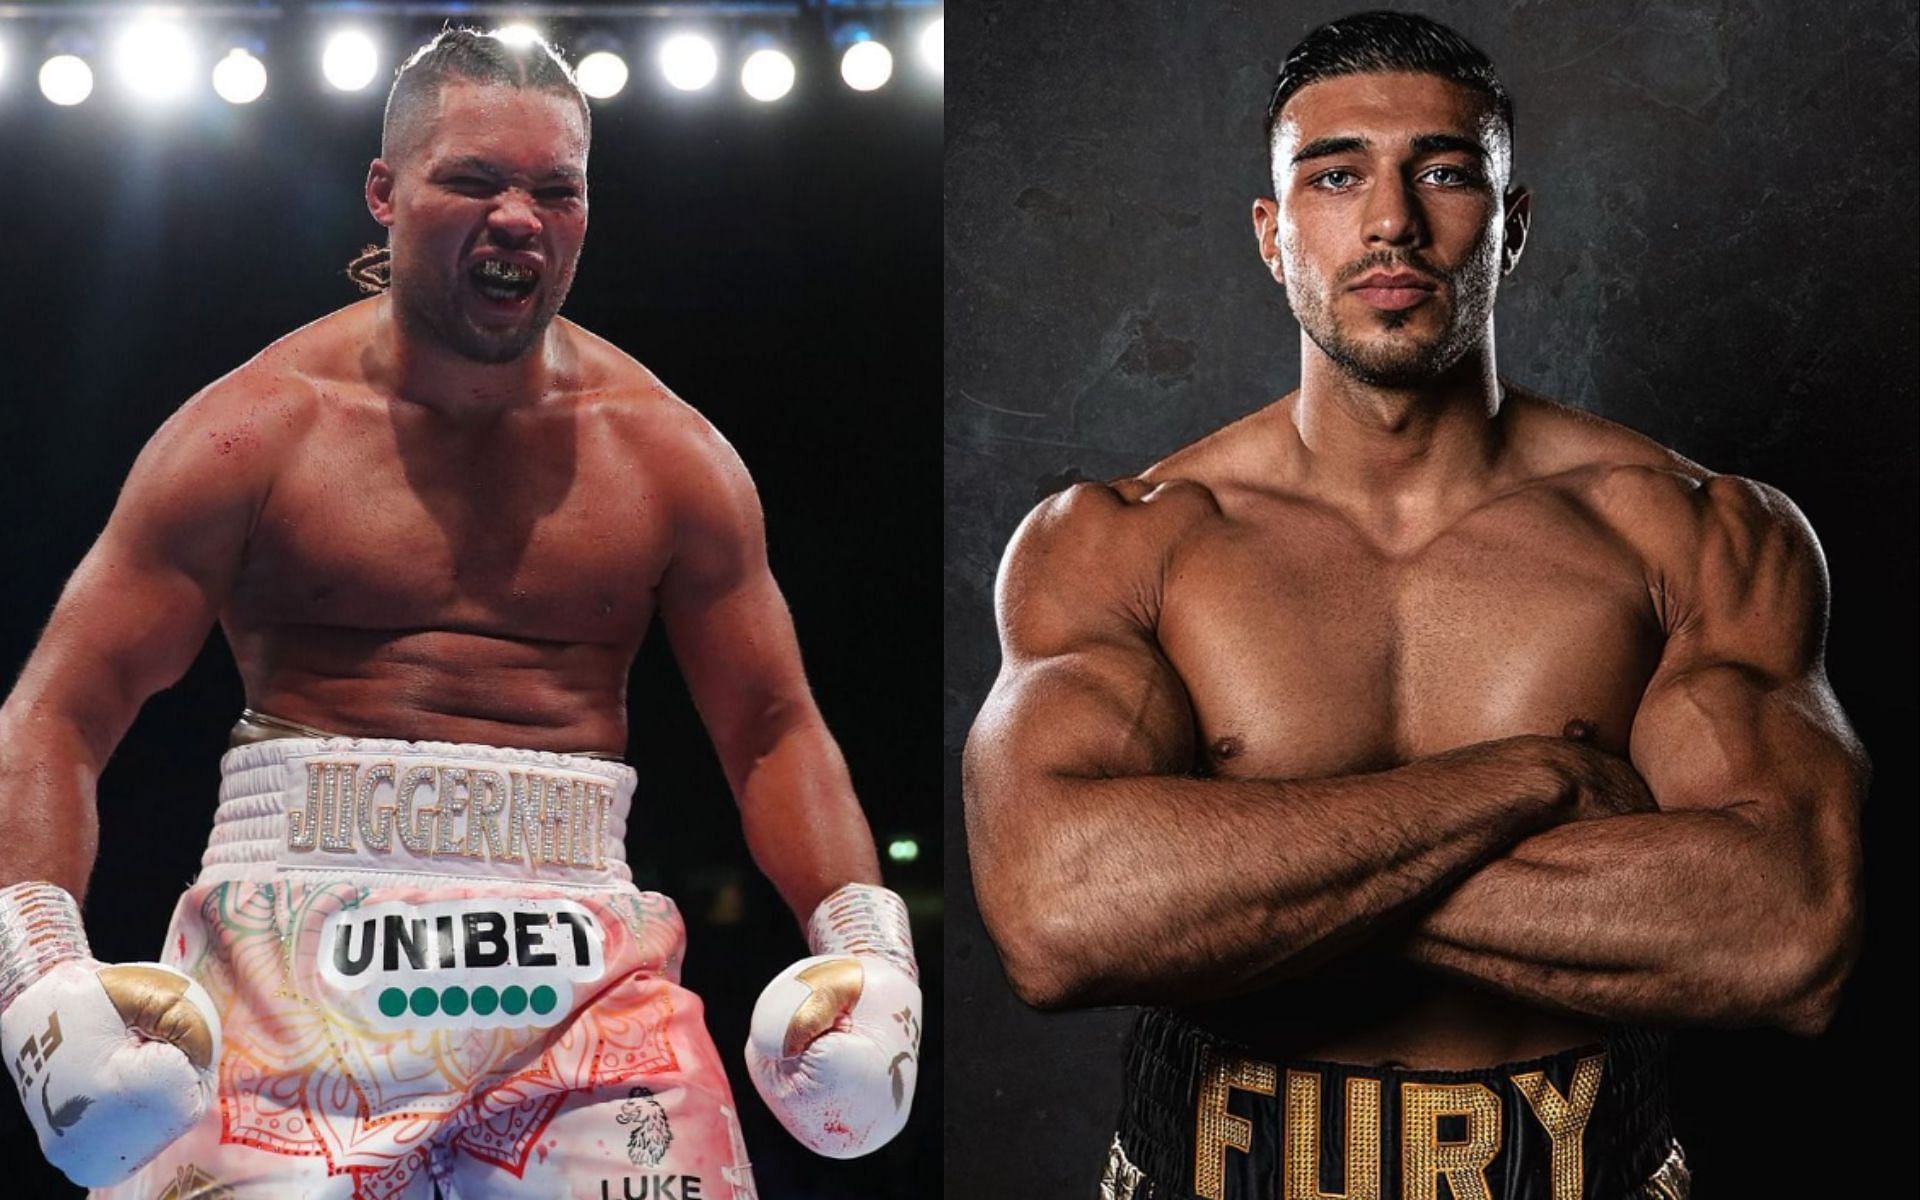 Joe Joyce (Left) and Tommy Fury (Right) [Images via: @joejoyceboxing and @tommyfury on Instagram]